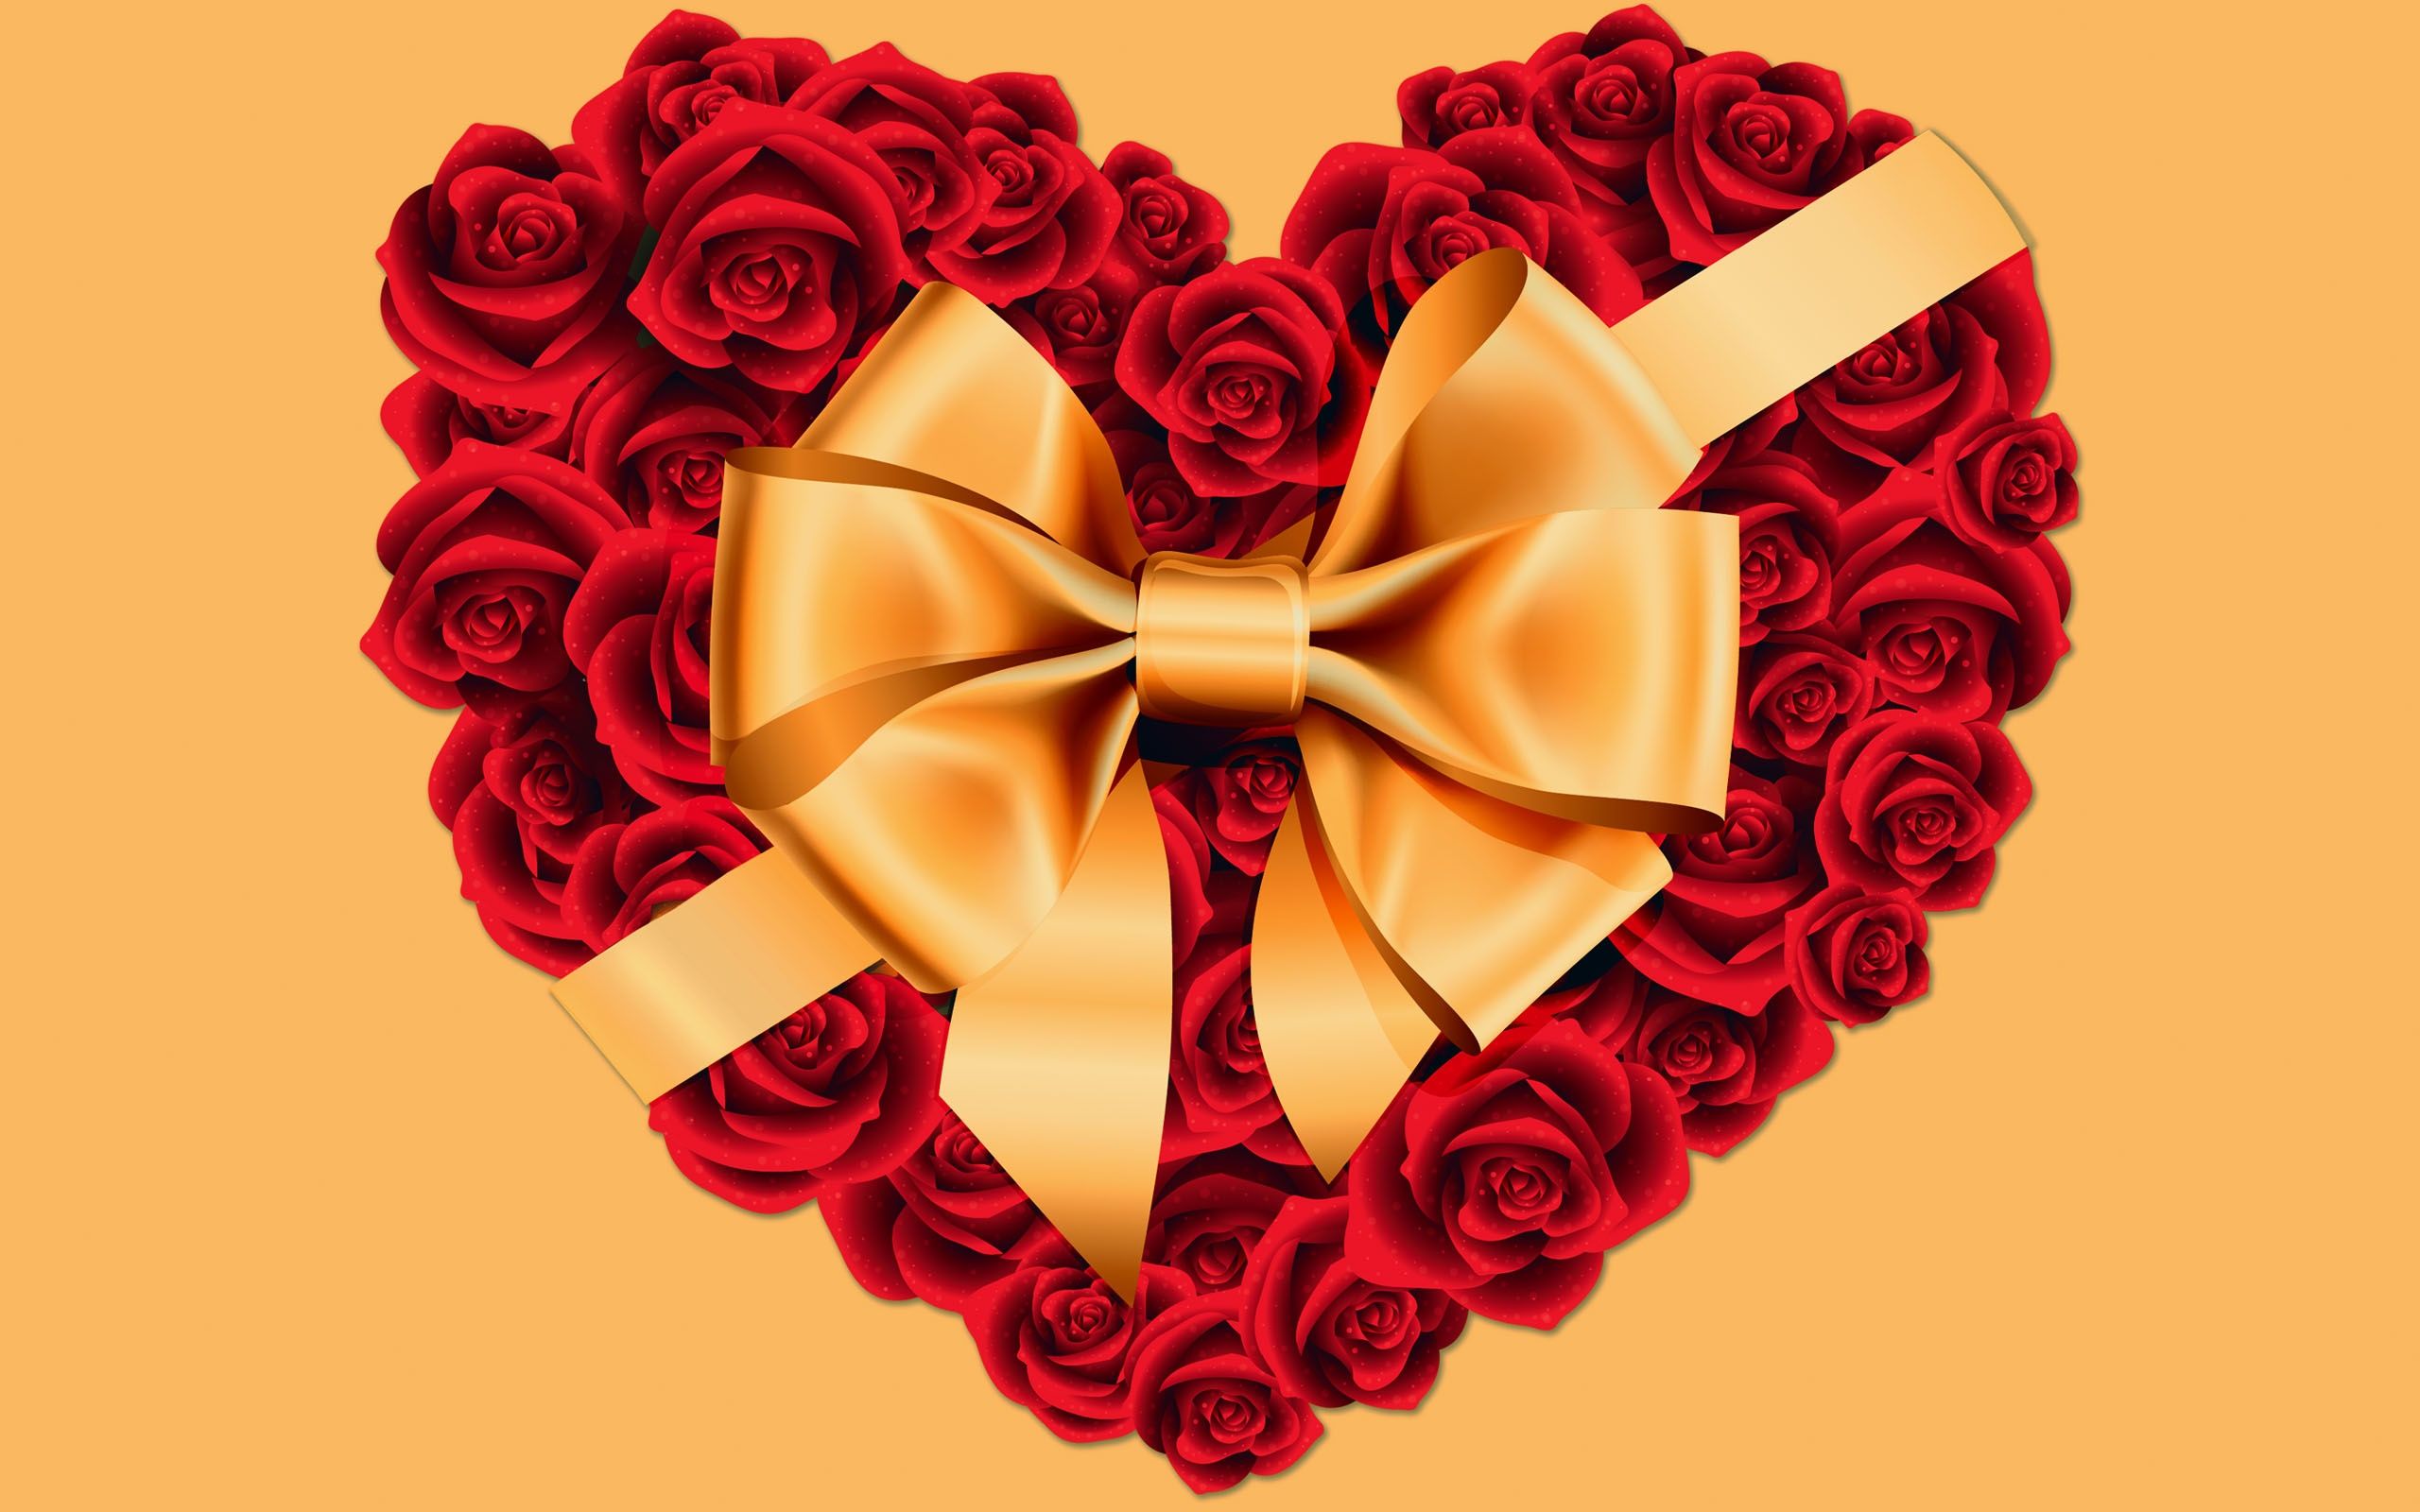 Large Rose Heart With Gold Bow's Day HD Wallpaper